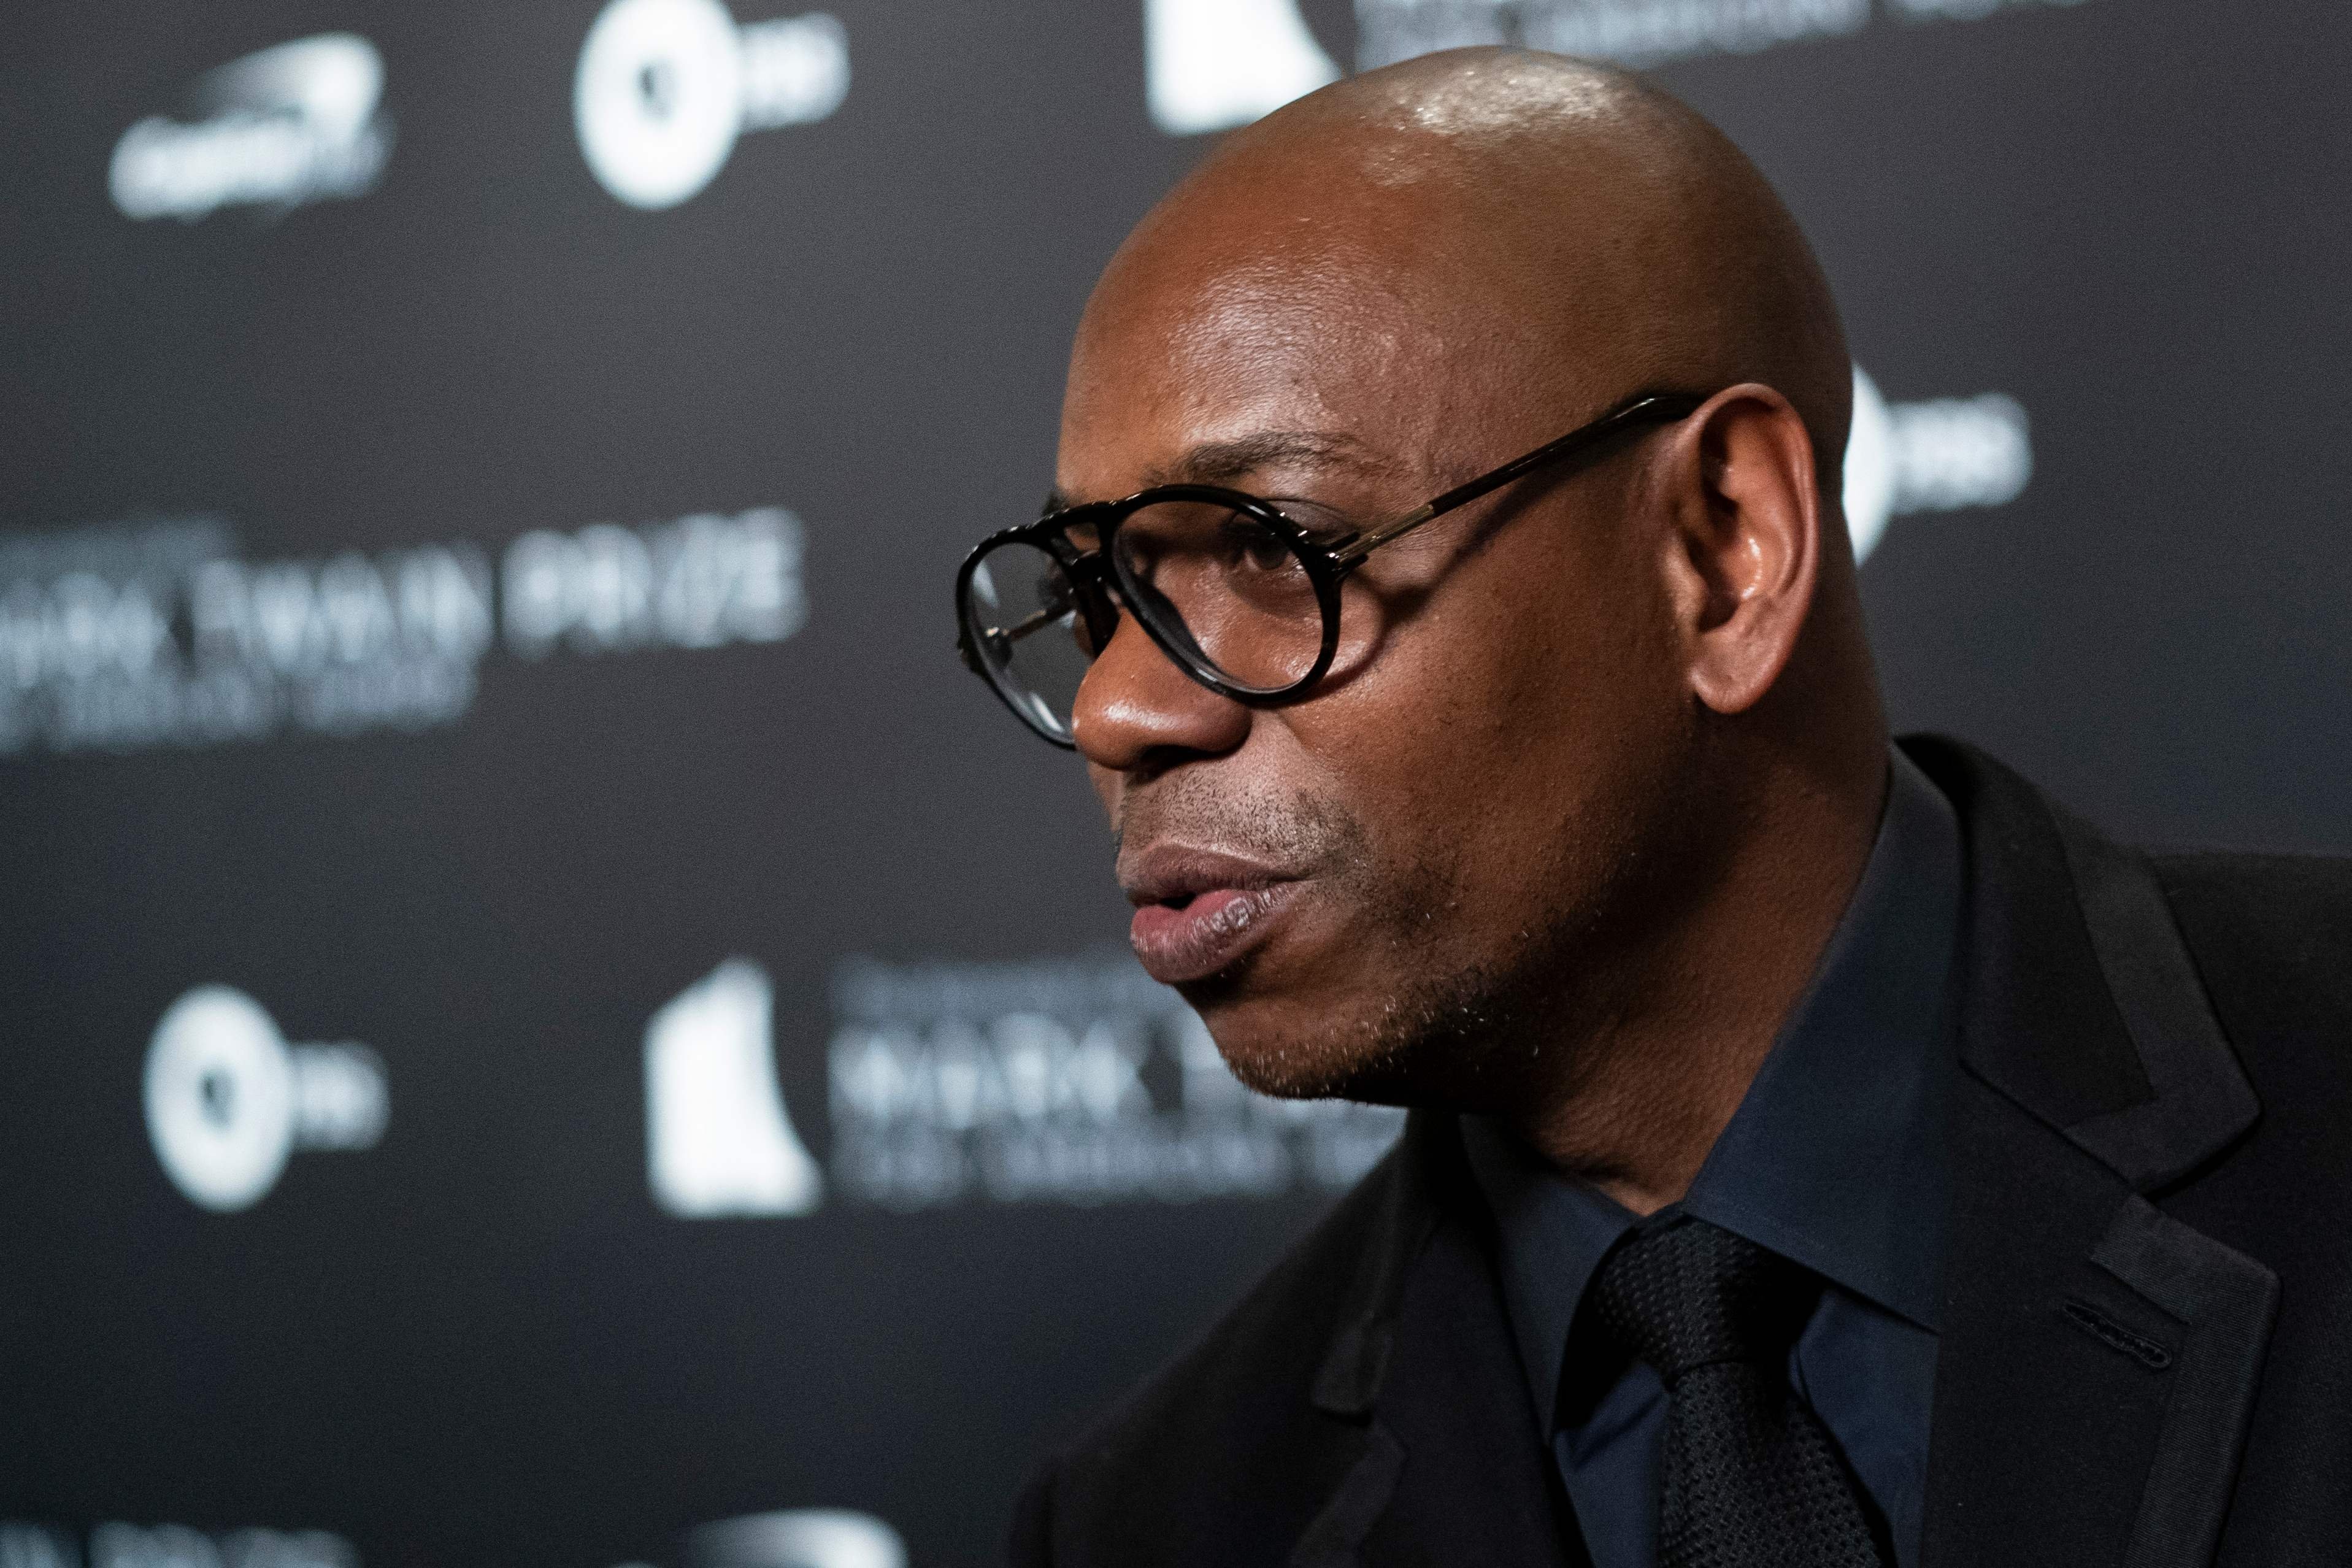 In this file photo taken on Oct. 27, 2019, American comedian Dave Chappelle, a recipient of the Mark Twain Award for American Humor, arrives at the Kennedy Center for the award ceremony in Washington, U.S. (AFP Photo)